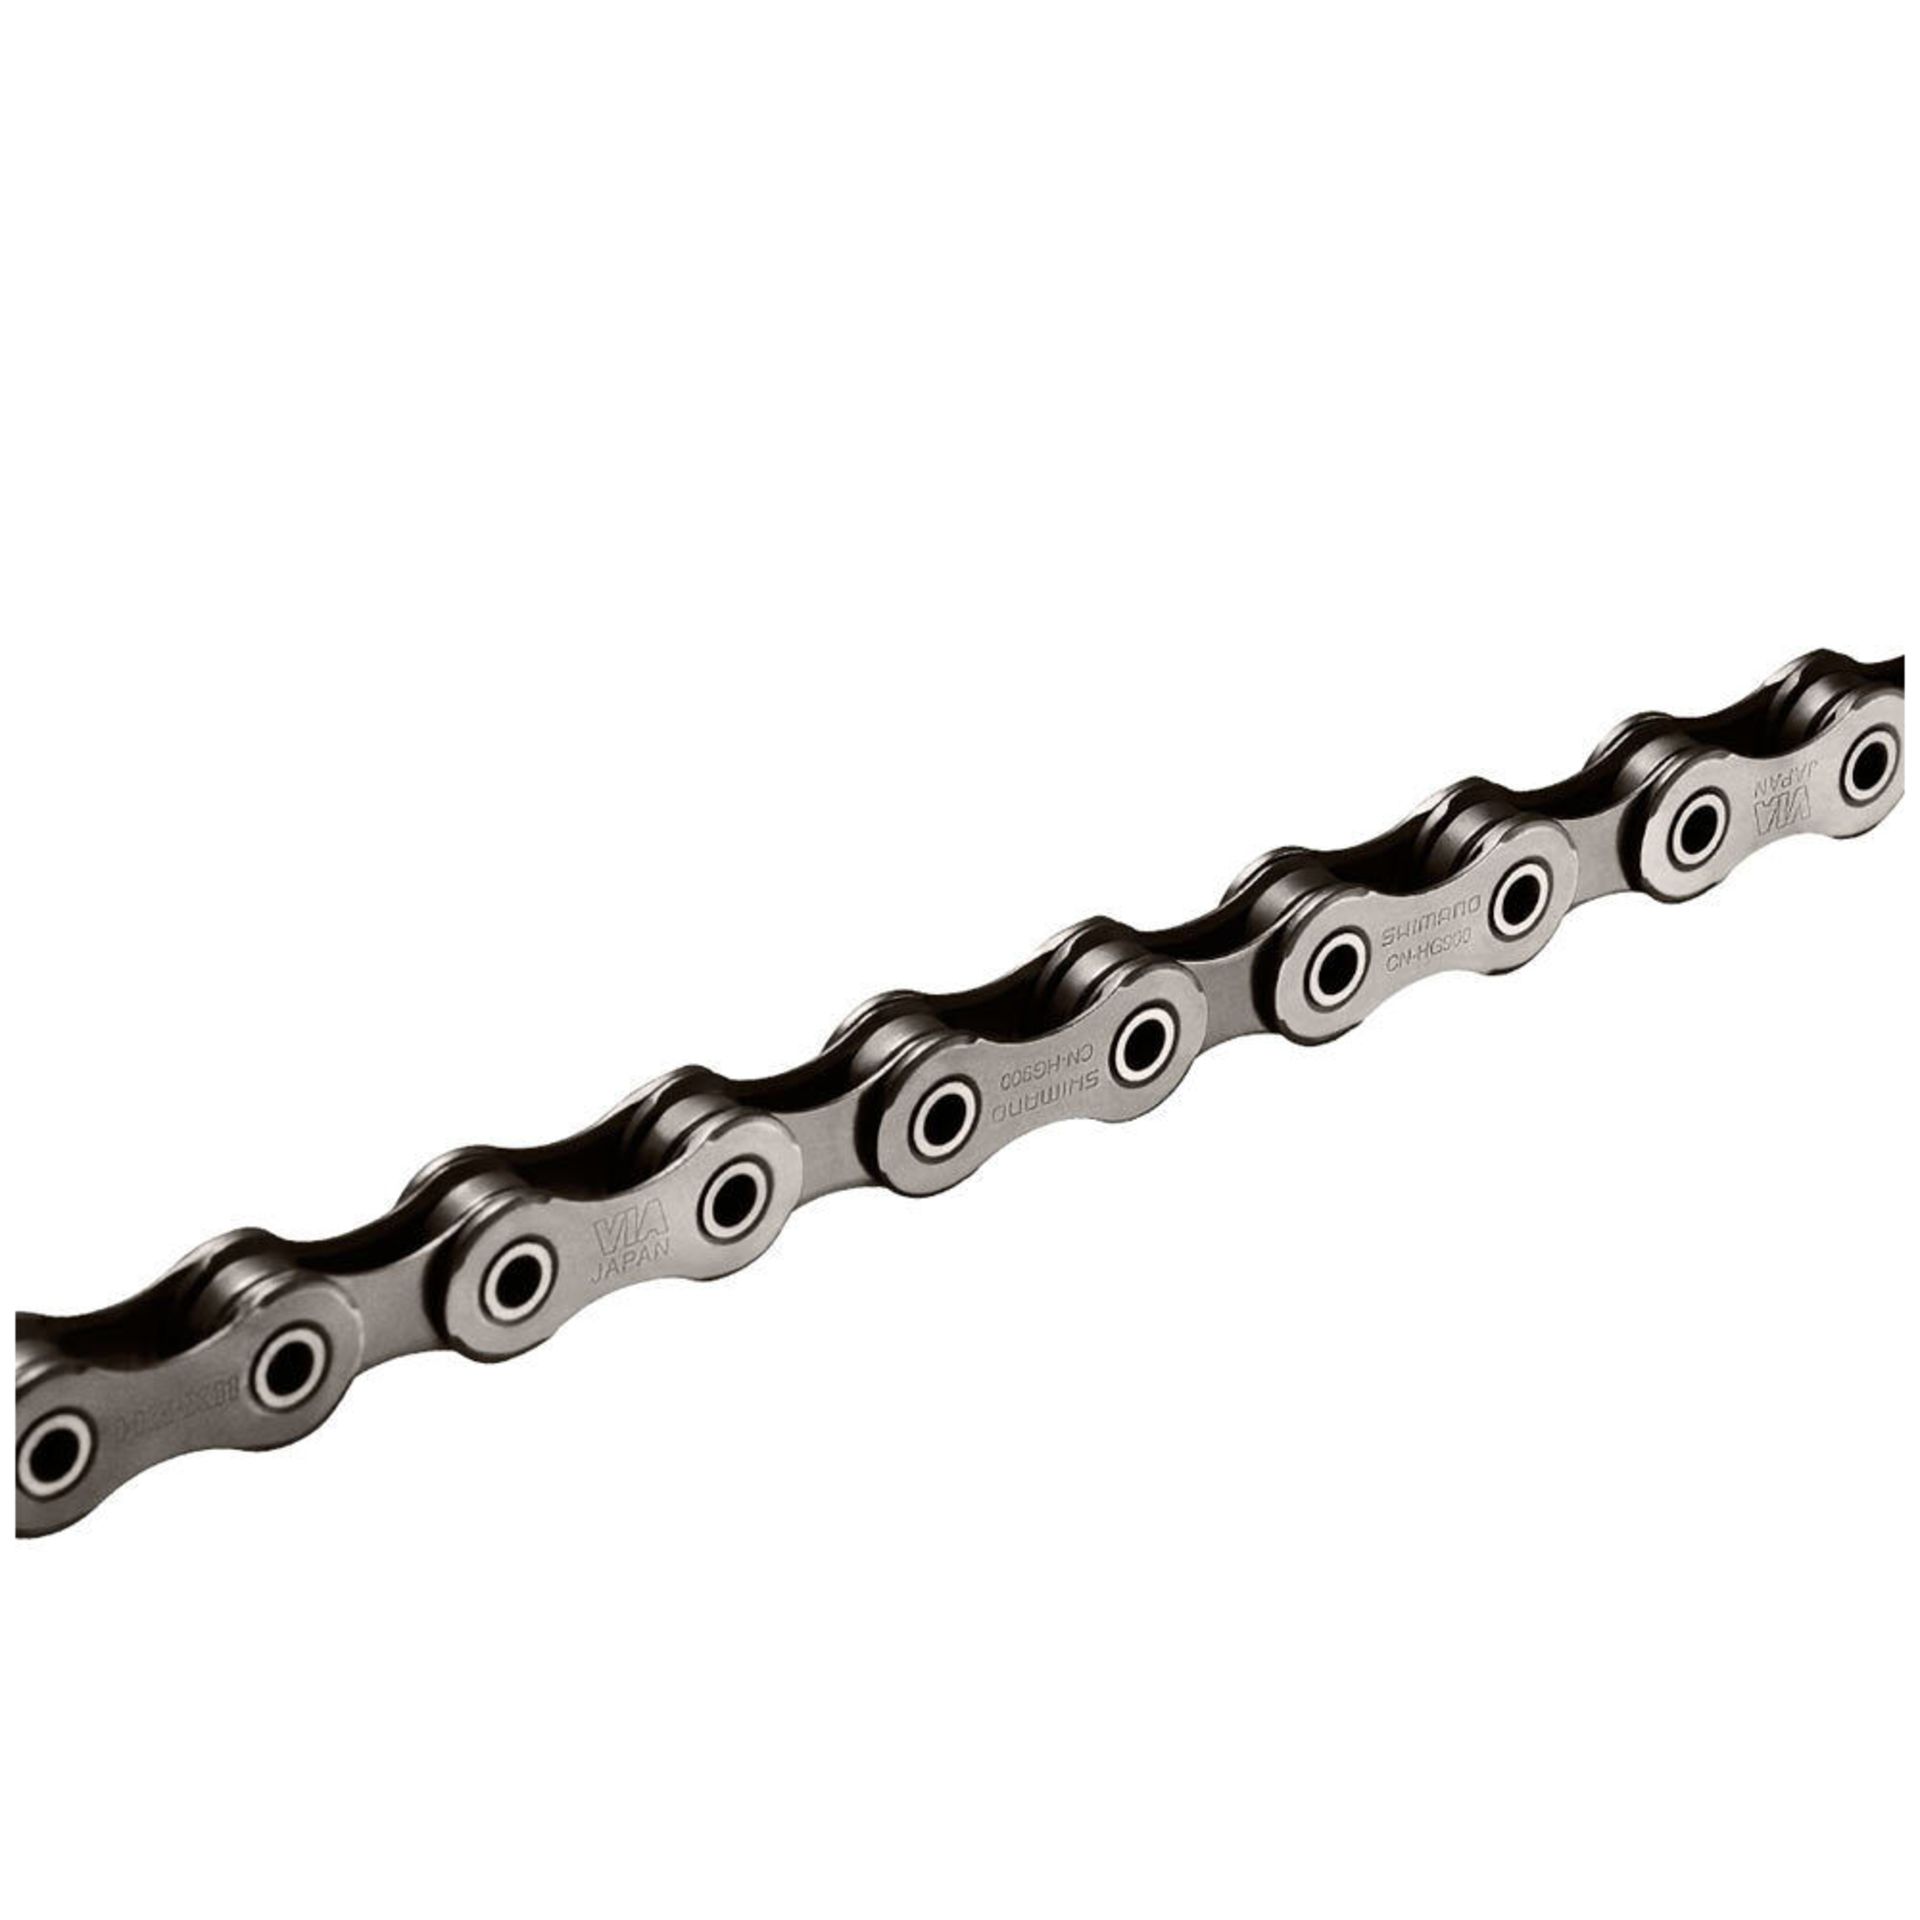 3 x Shimano CN-HG901-11 SIL-TEC 11 Speed Chains, 116 Links